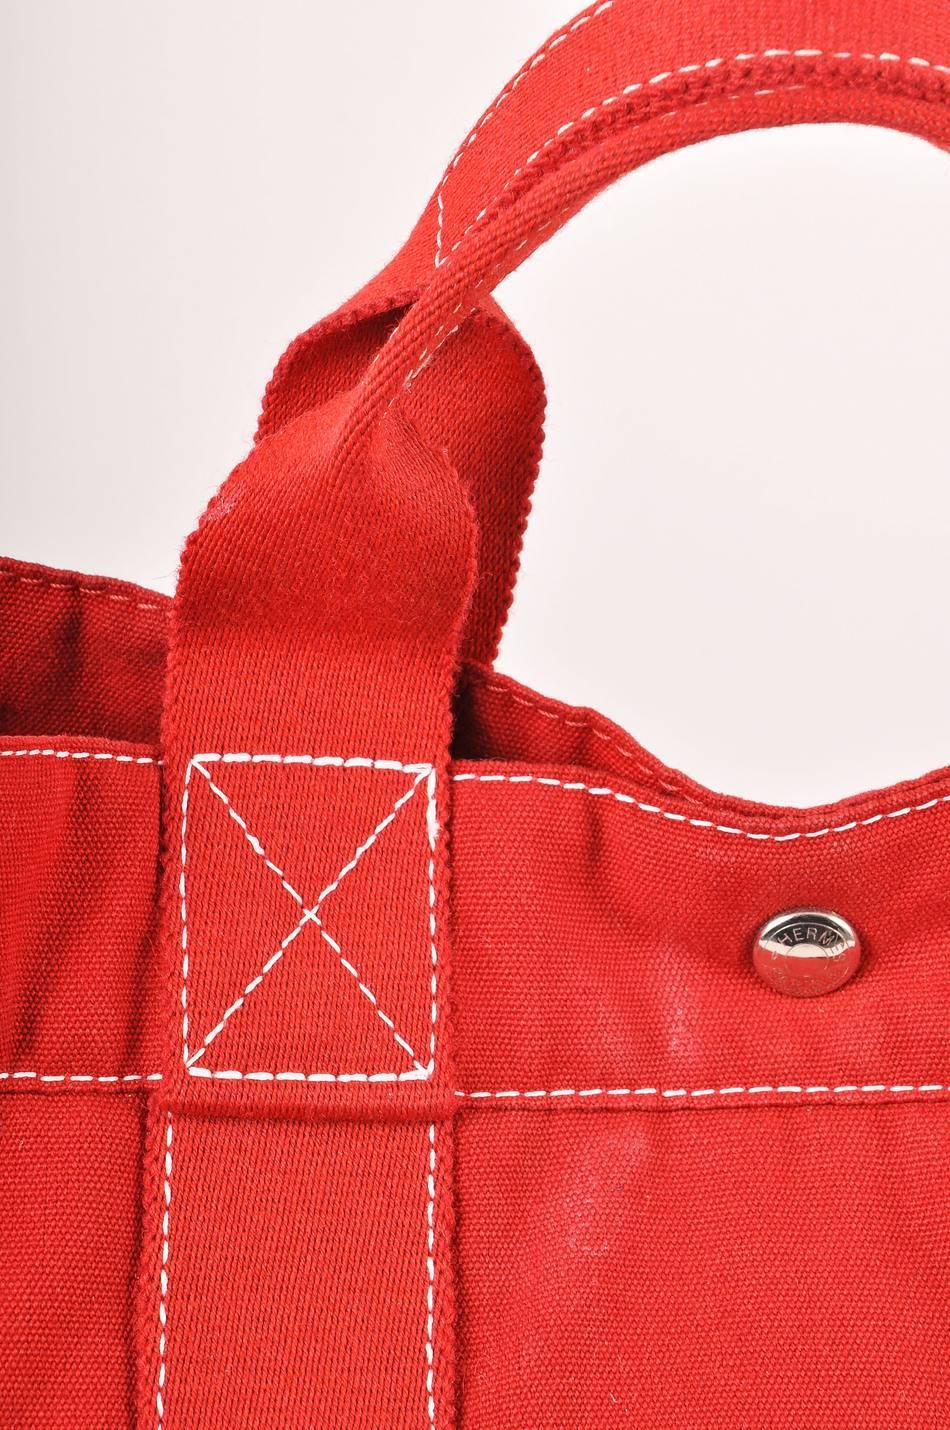 Red canvas beach tote has white stitching details throughout. Three flat pockets along each side. Two flat handles and snap closure at top. One large zipper pocket inside.

Additional Measurements:
Handle length: 11